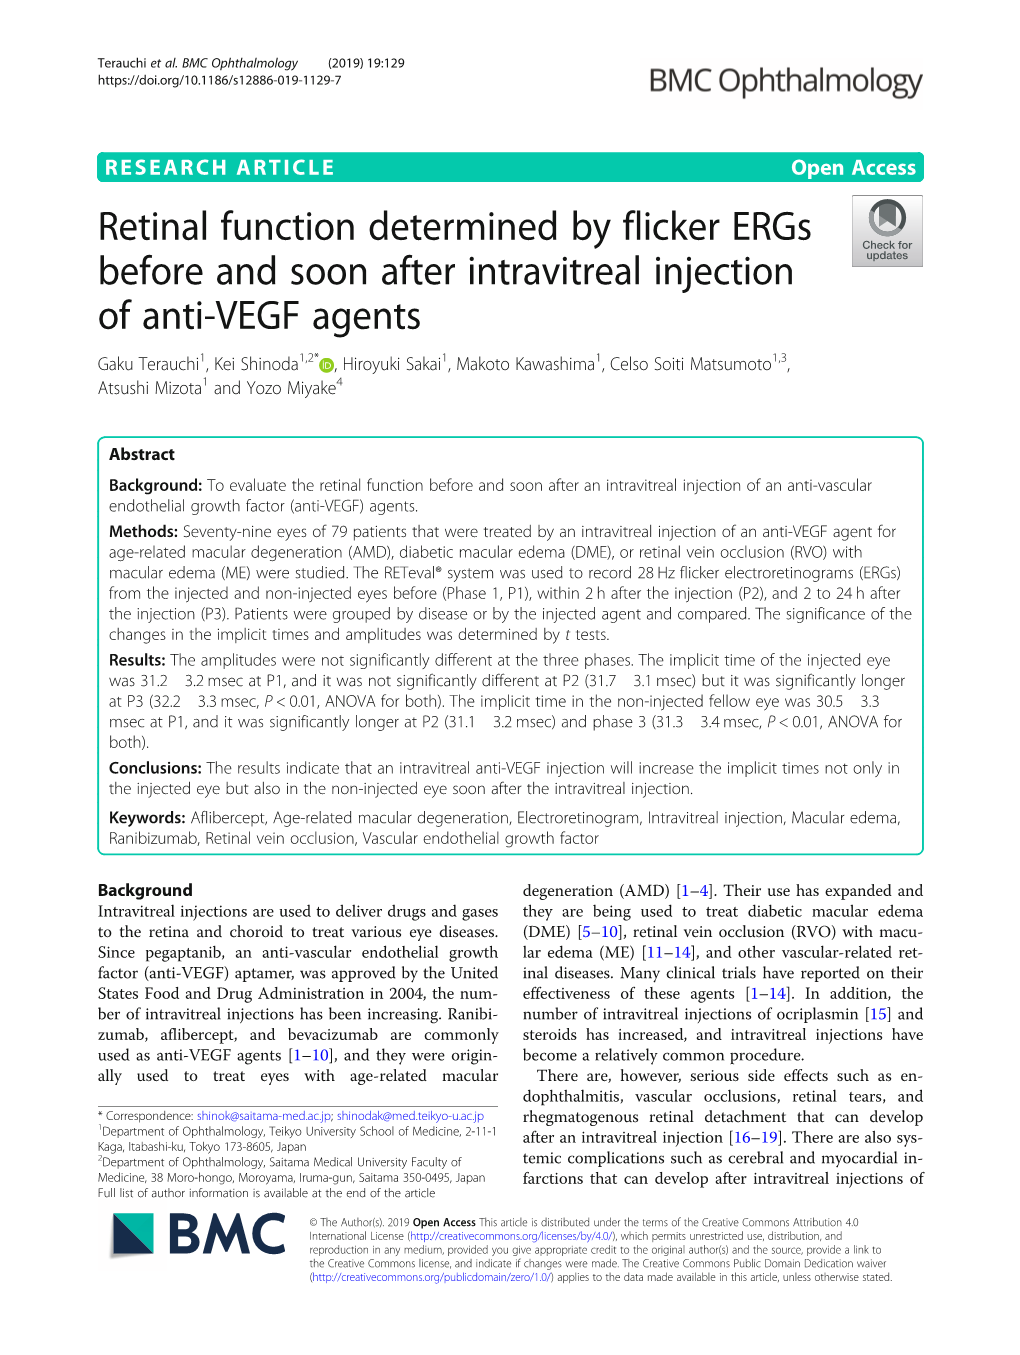 Retinal Function Determined by Flicker Ergs Before and Soon After